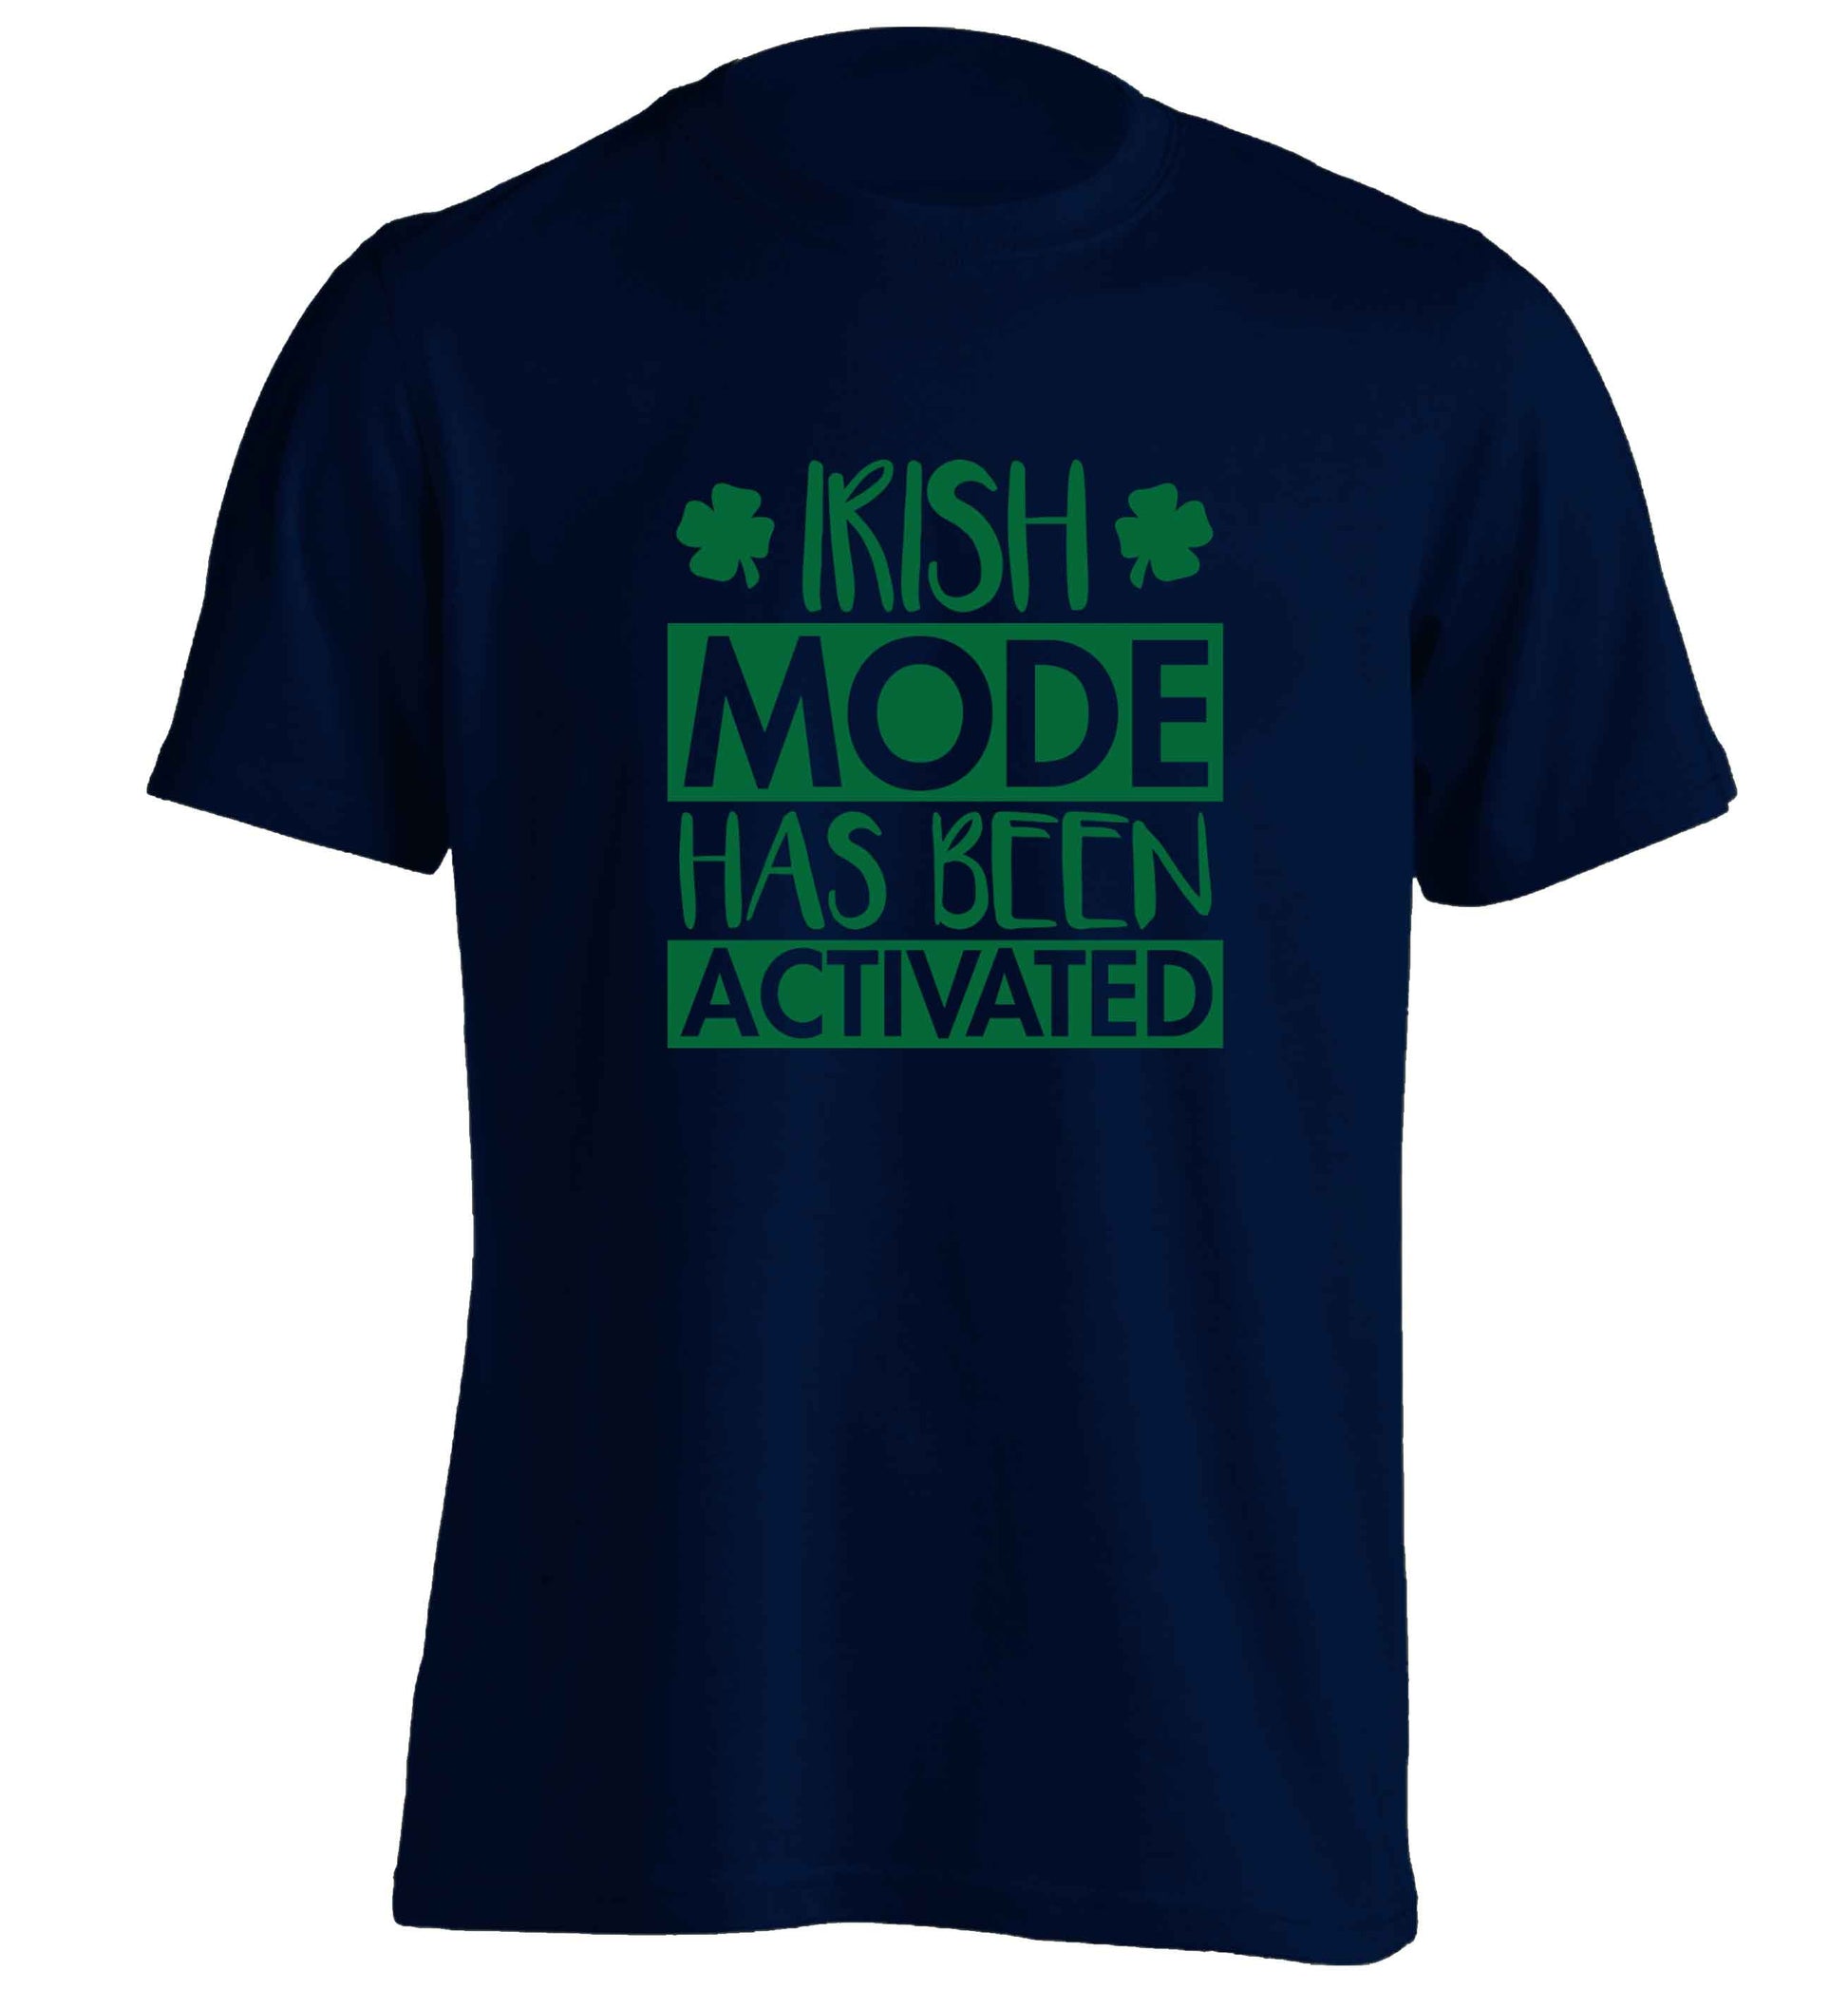 Irish mode has been activated adults unisex navy Tshirt 2XL